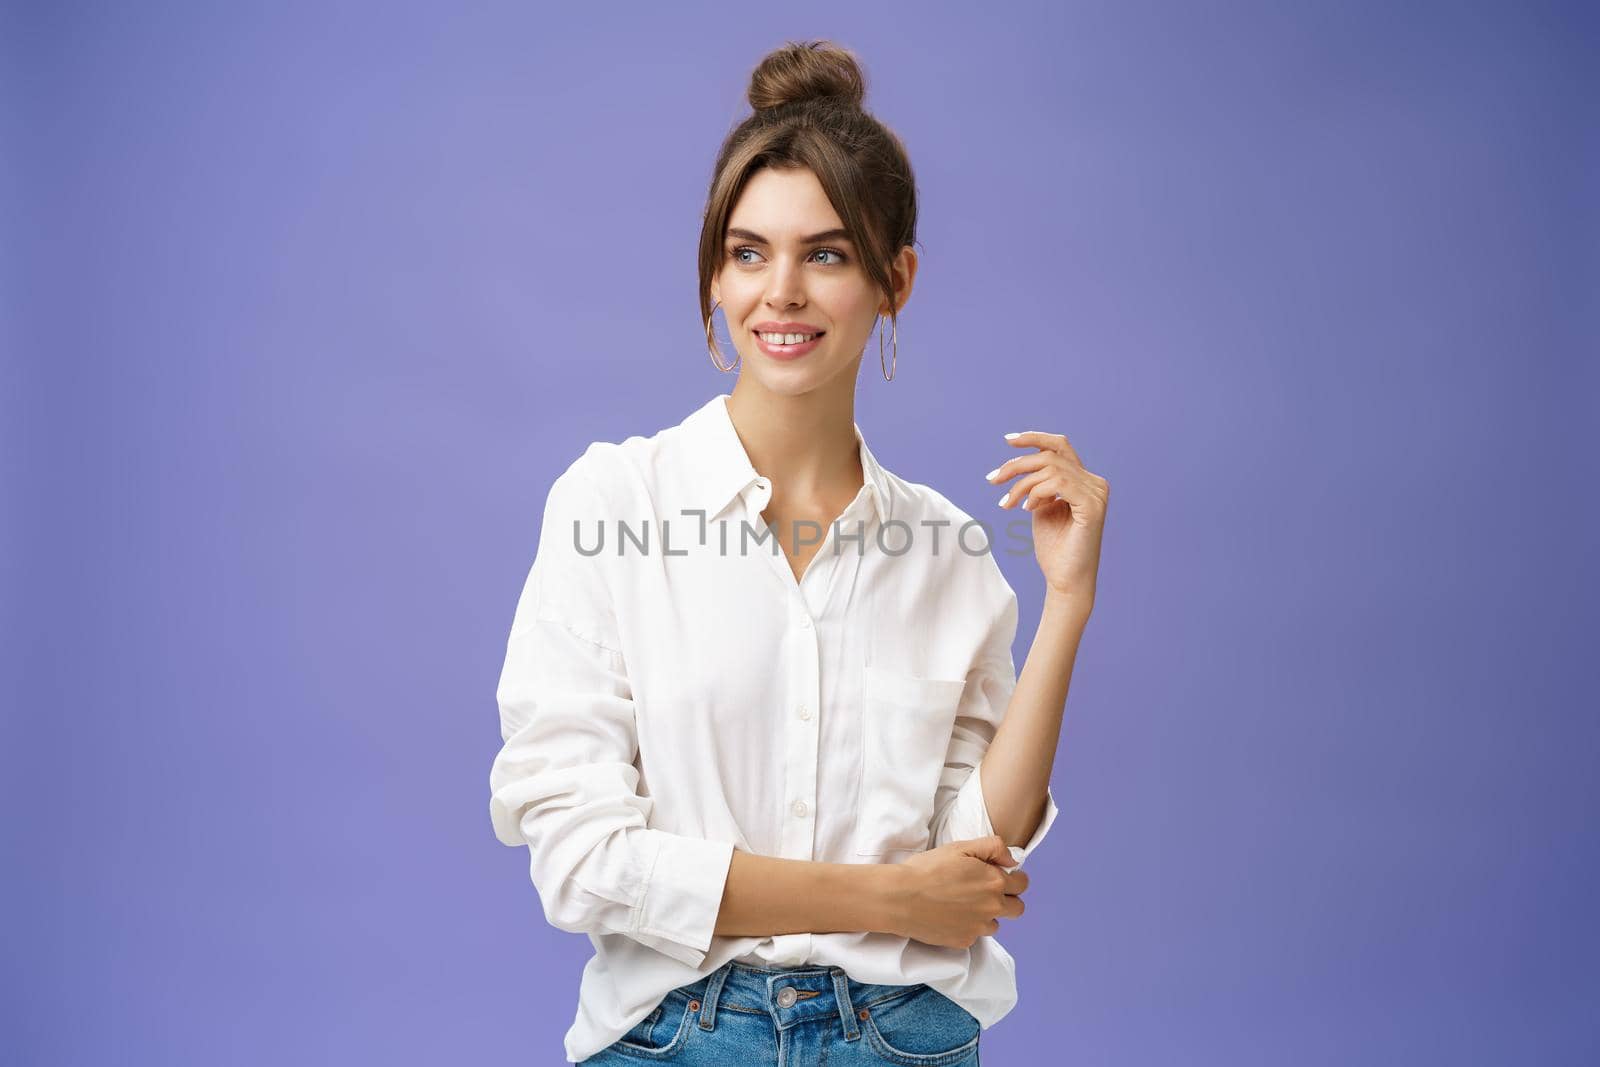 Feminine and stylish modern charming girl with gapped teeth and pimple posing in trendy white blouse and round earrings gazing left charmed and sensual with cute smile over purple background. Lifestyle.